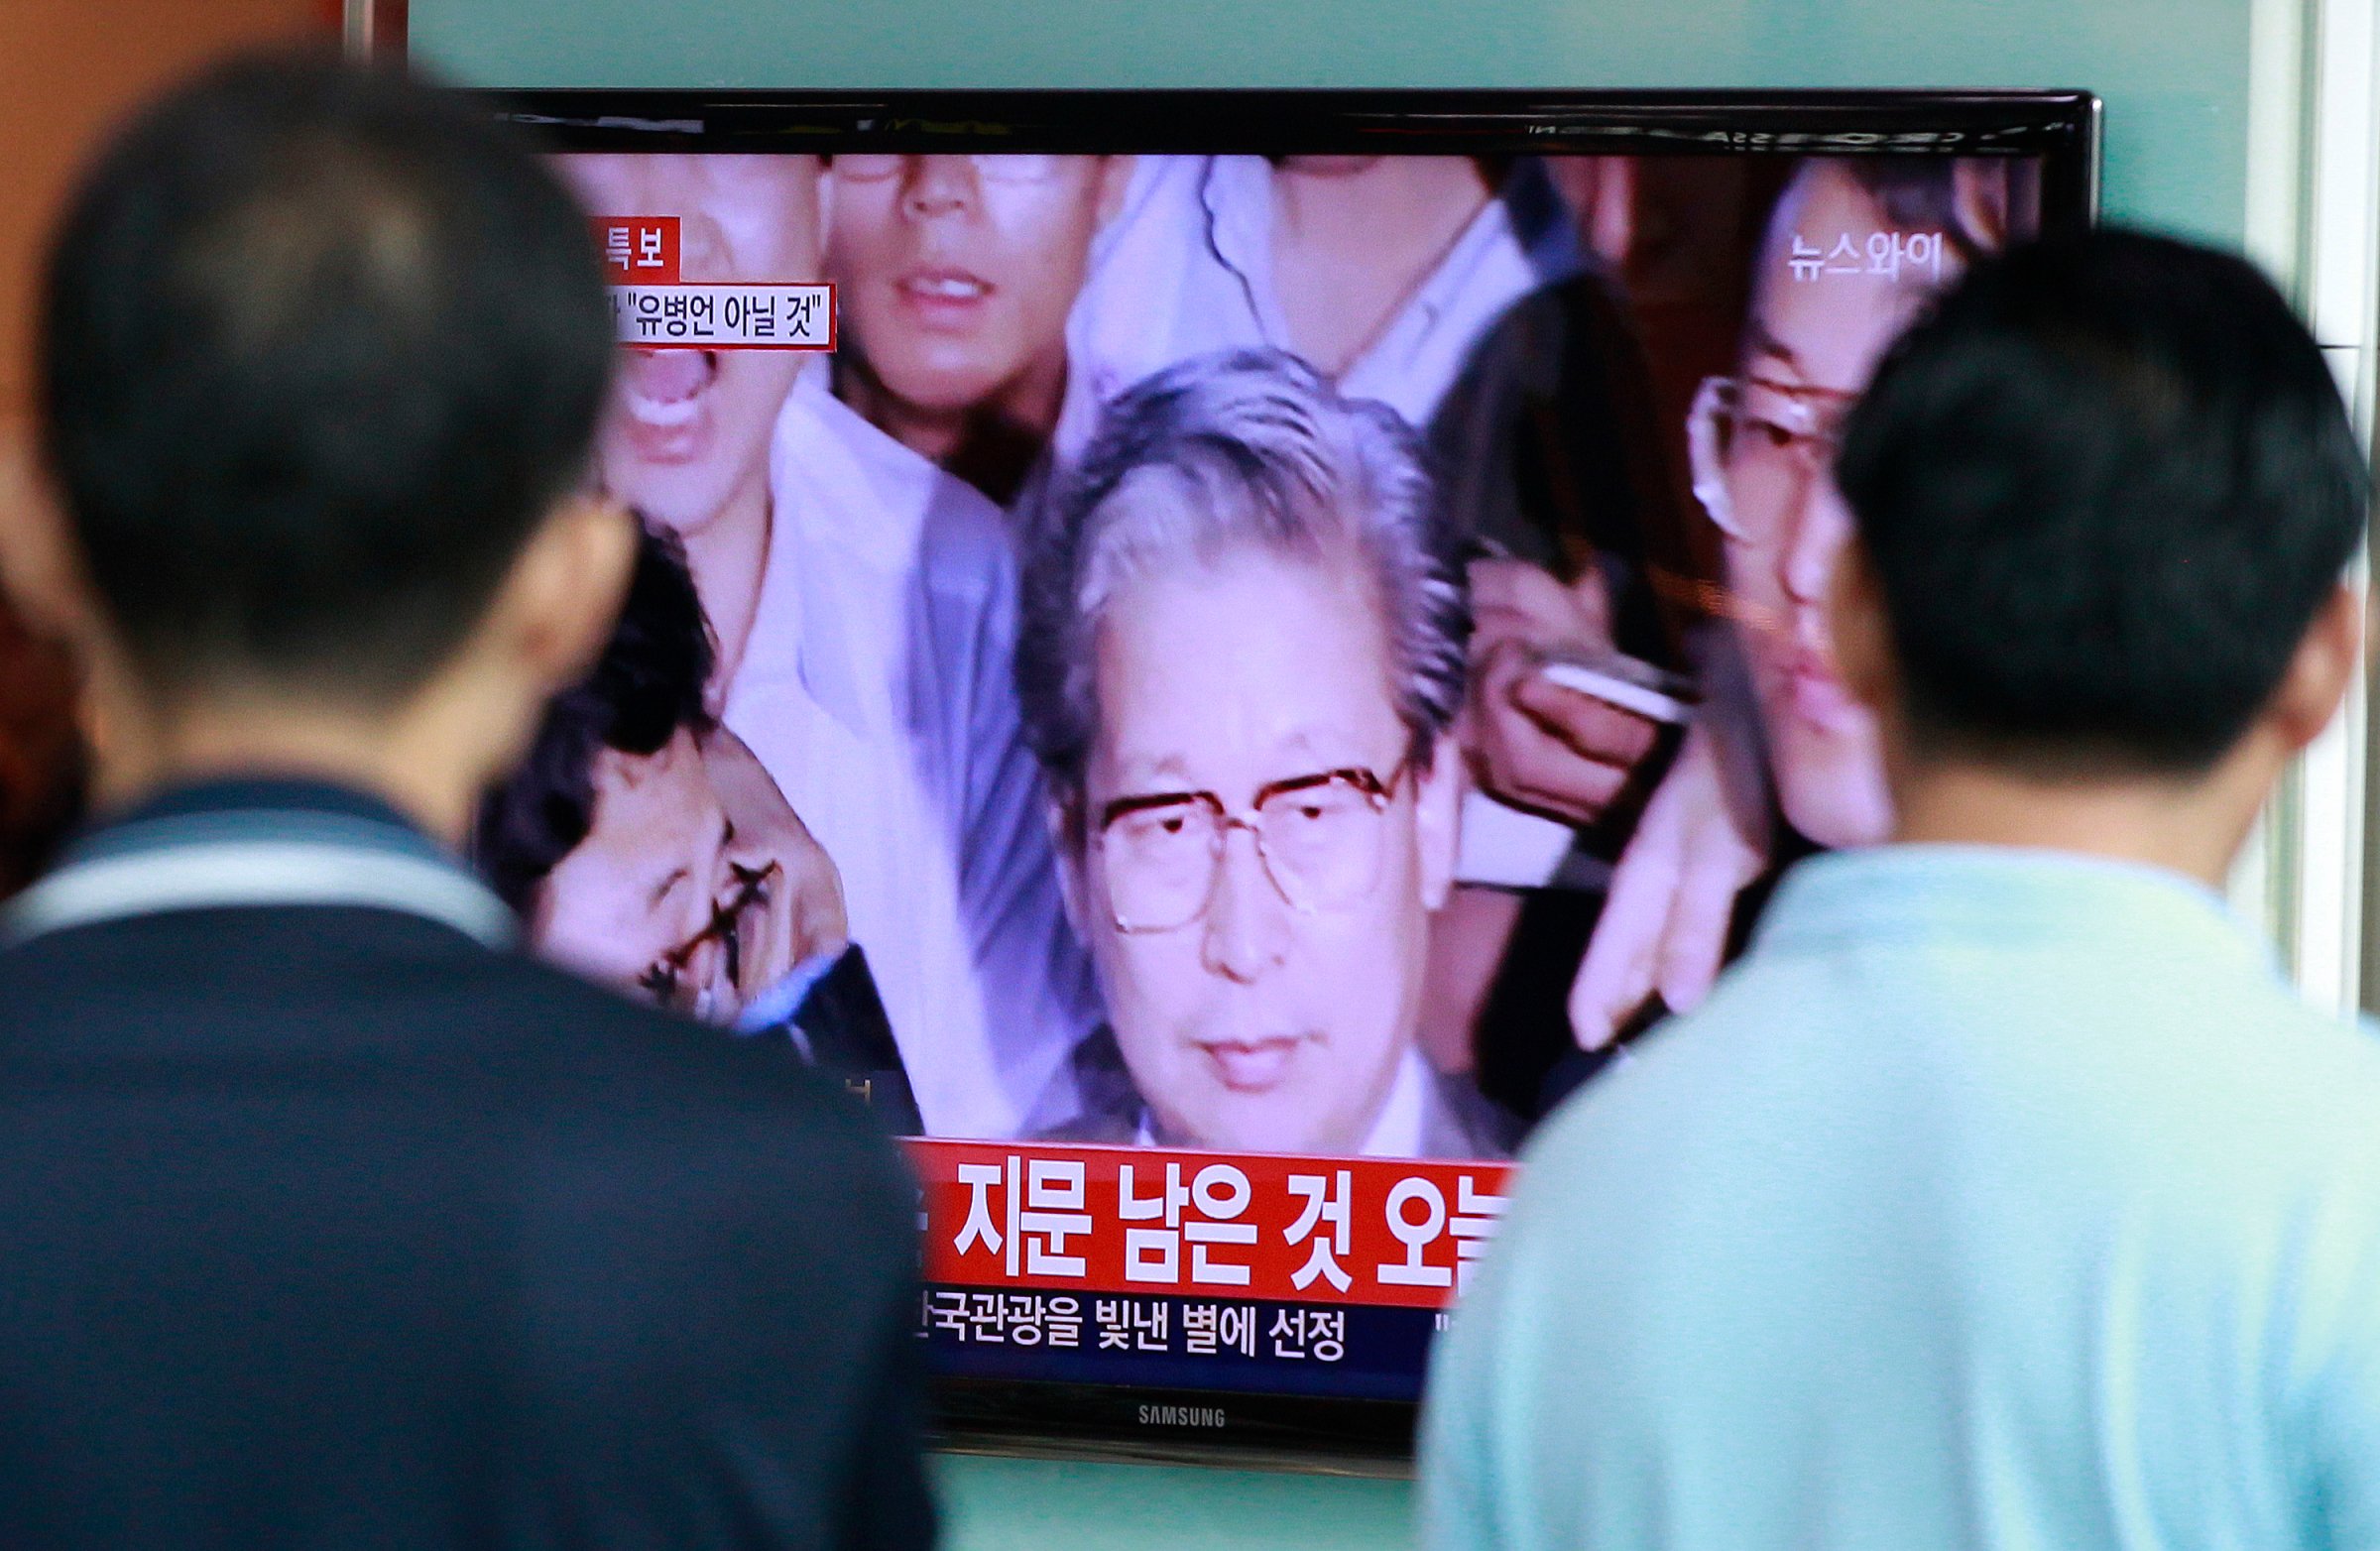 Passersby watch TV news showing Yoo Byung-eun, the fugitive owner of the sunken ferry Sewol, at Seoul Railway Station in Seoul on July 22, 2014.